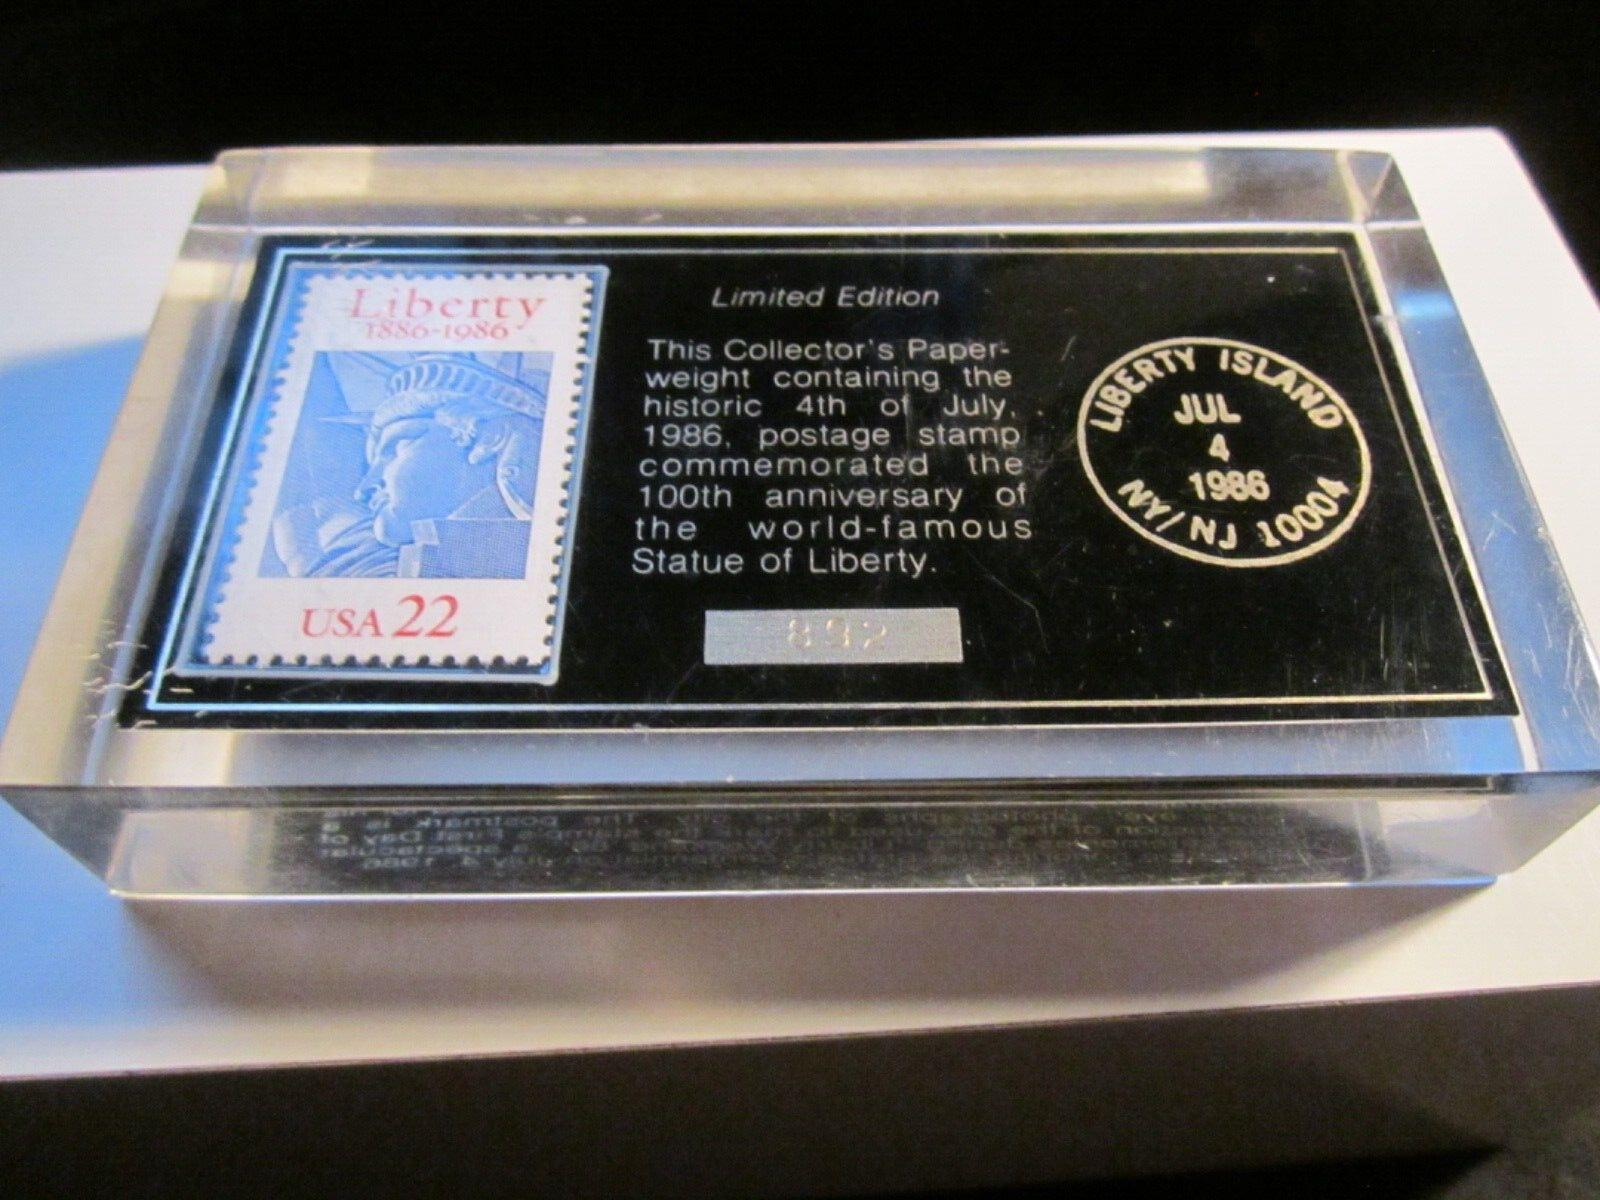 1986 LIMITED EDITION LIBERTY ISLAND STAMP PAPERWEIGHT NUMBERED 892 -  BBA-23D